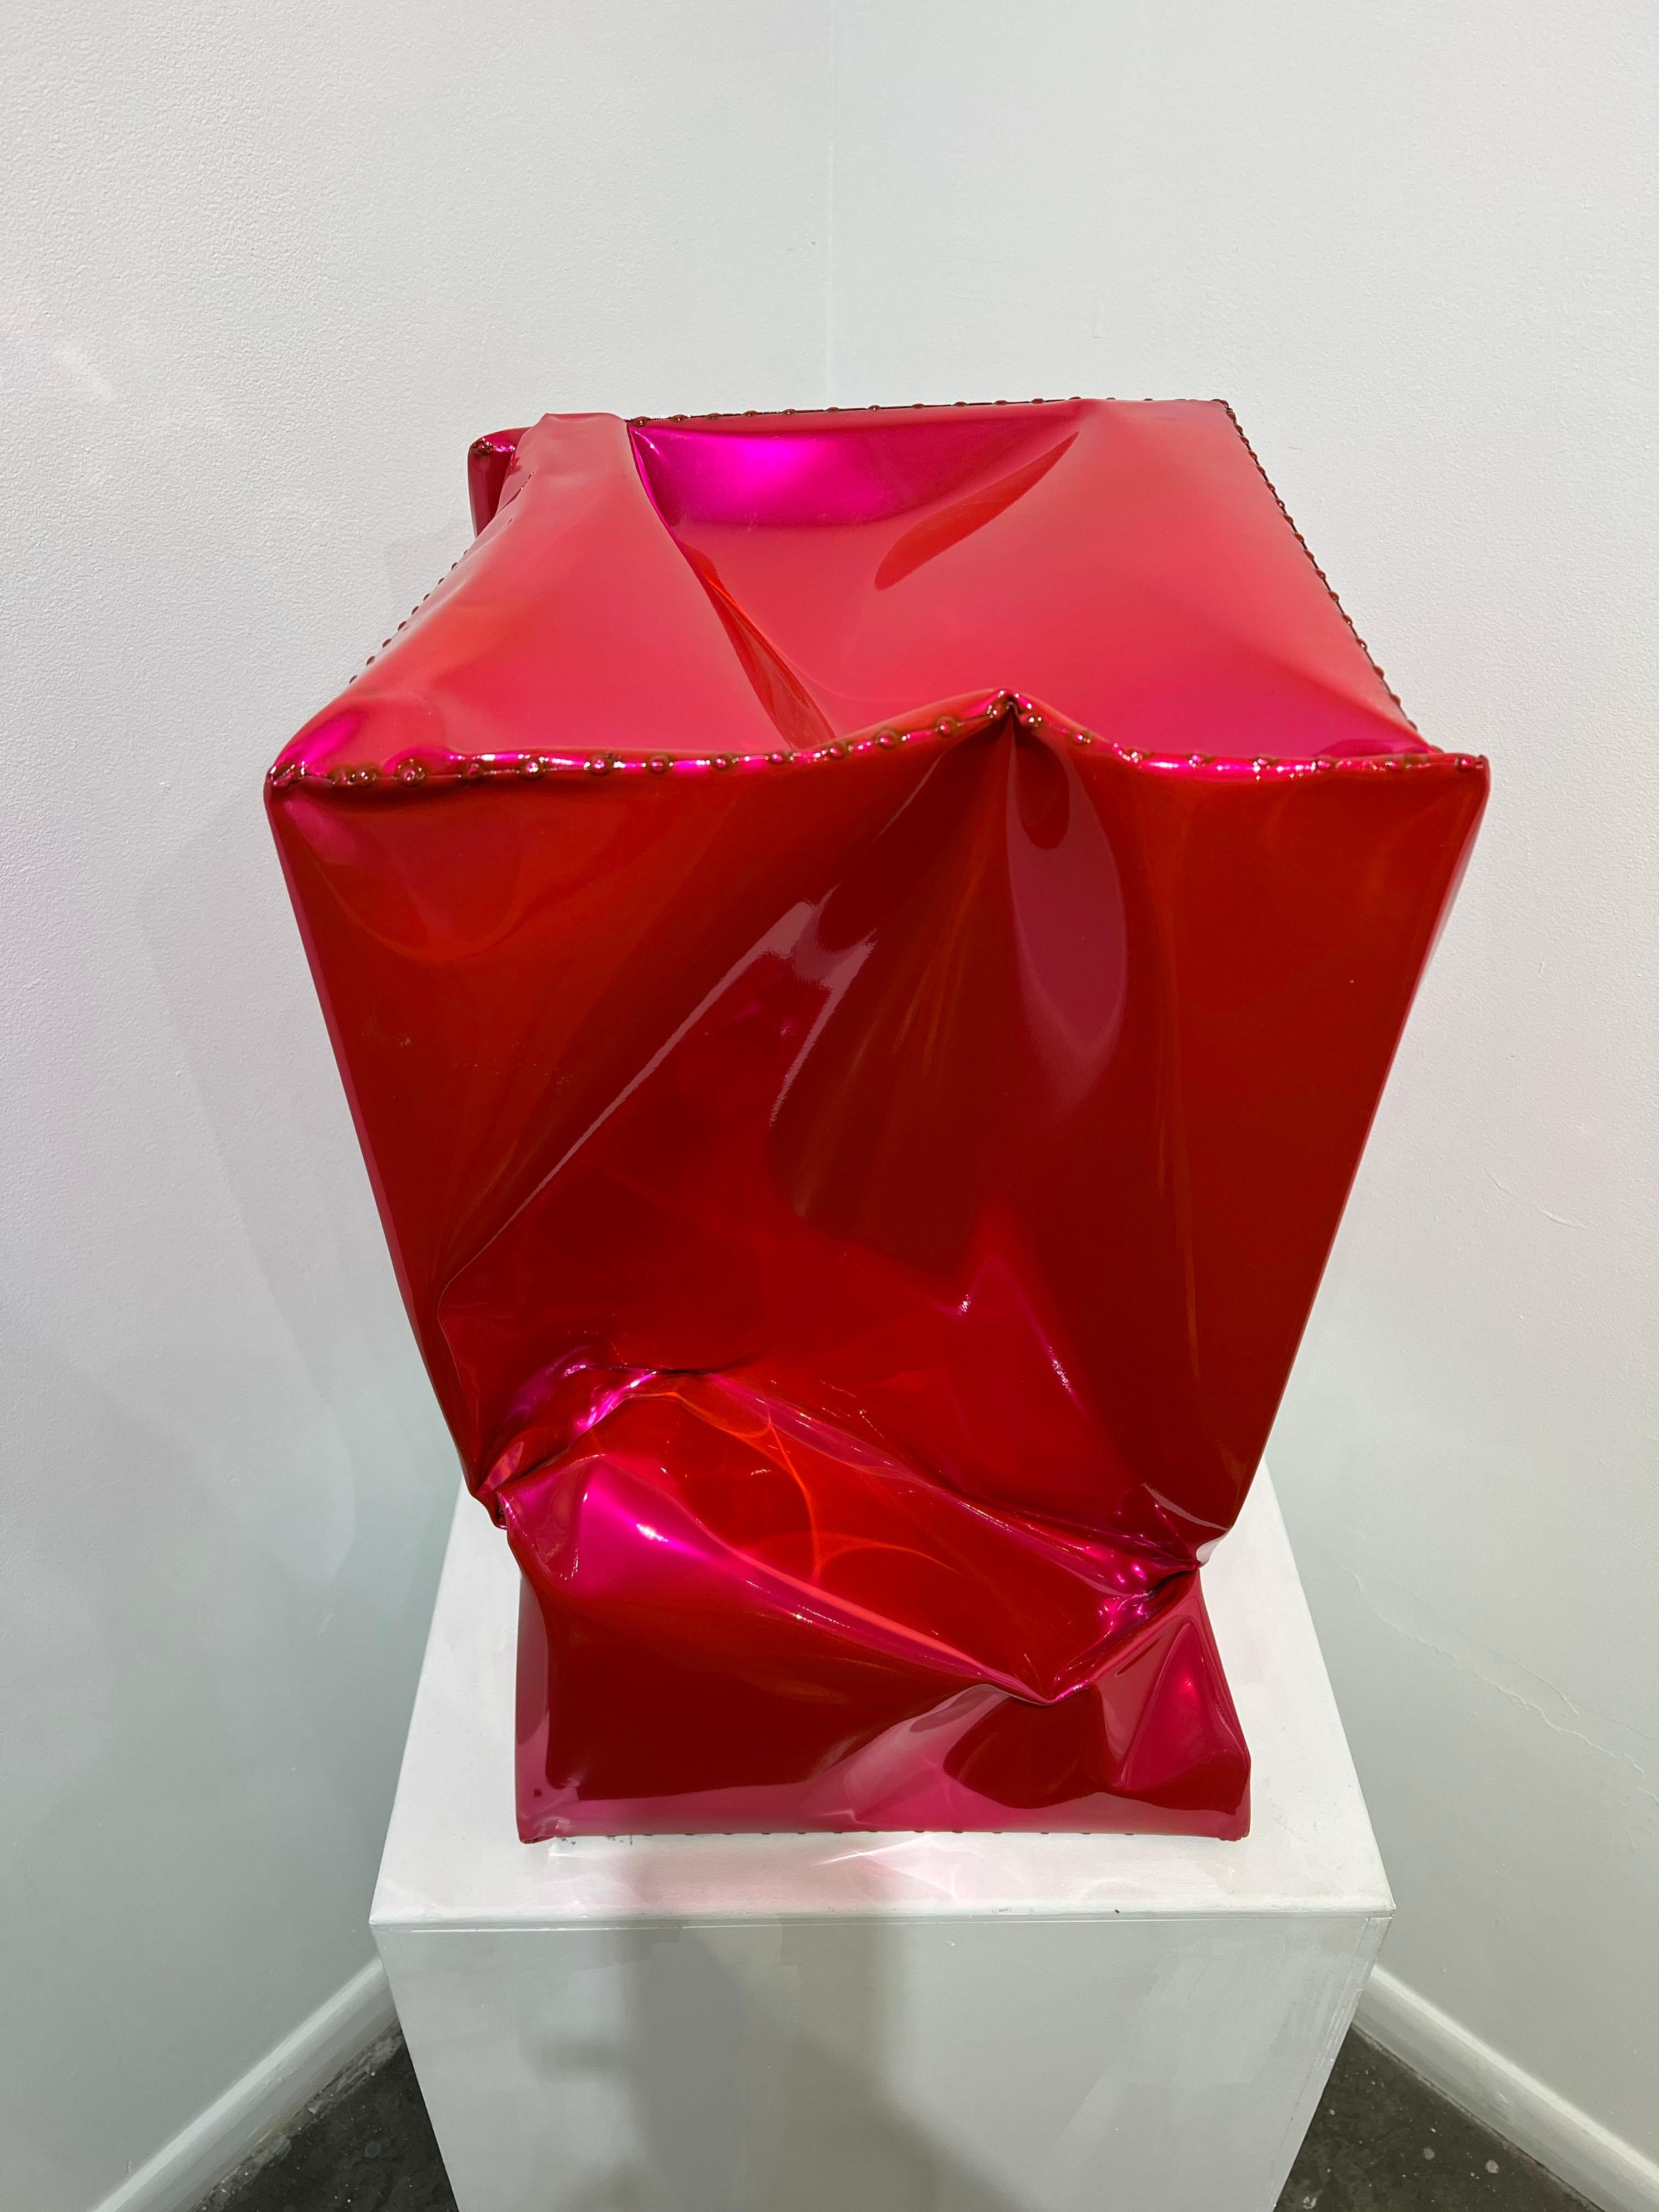 An outdoor sculpture made out of powder coated stainless steel. This sculpture is a rich, vibrant, and shiny pink. 

Rick Lazes is a three dimensional artist who works in a variety of media including wood, plaster, stainless steel, glass,